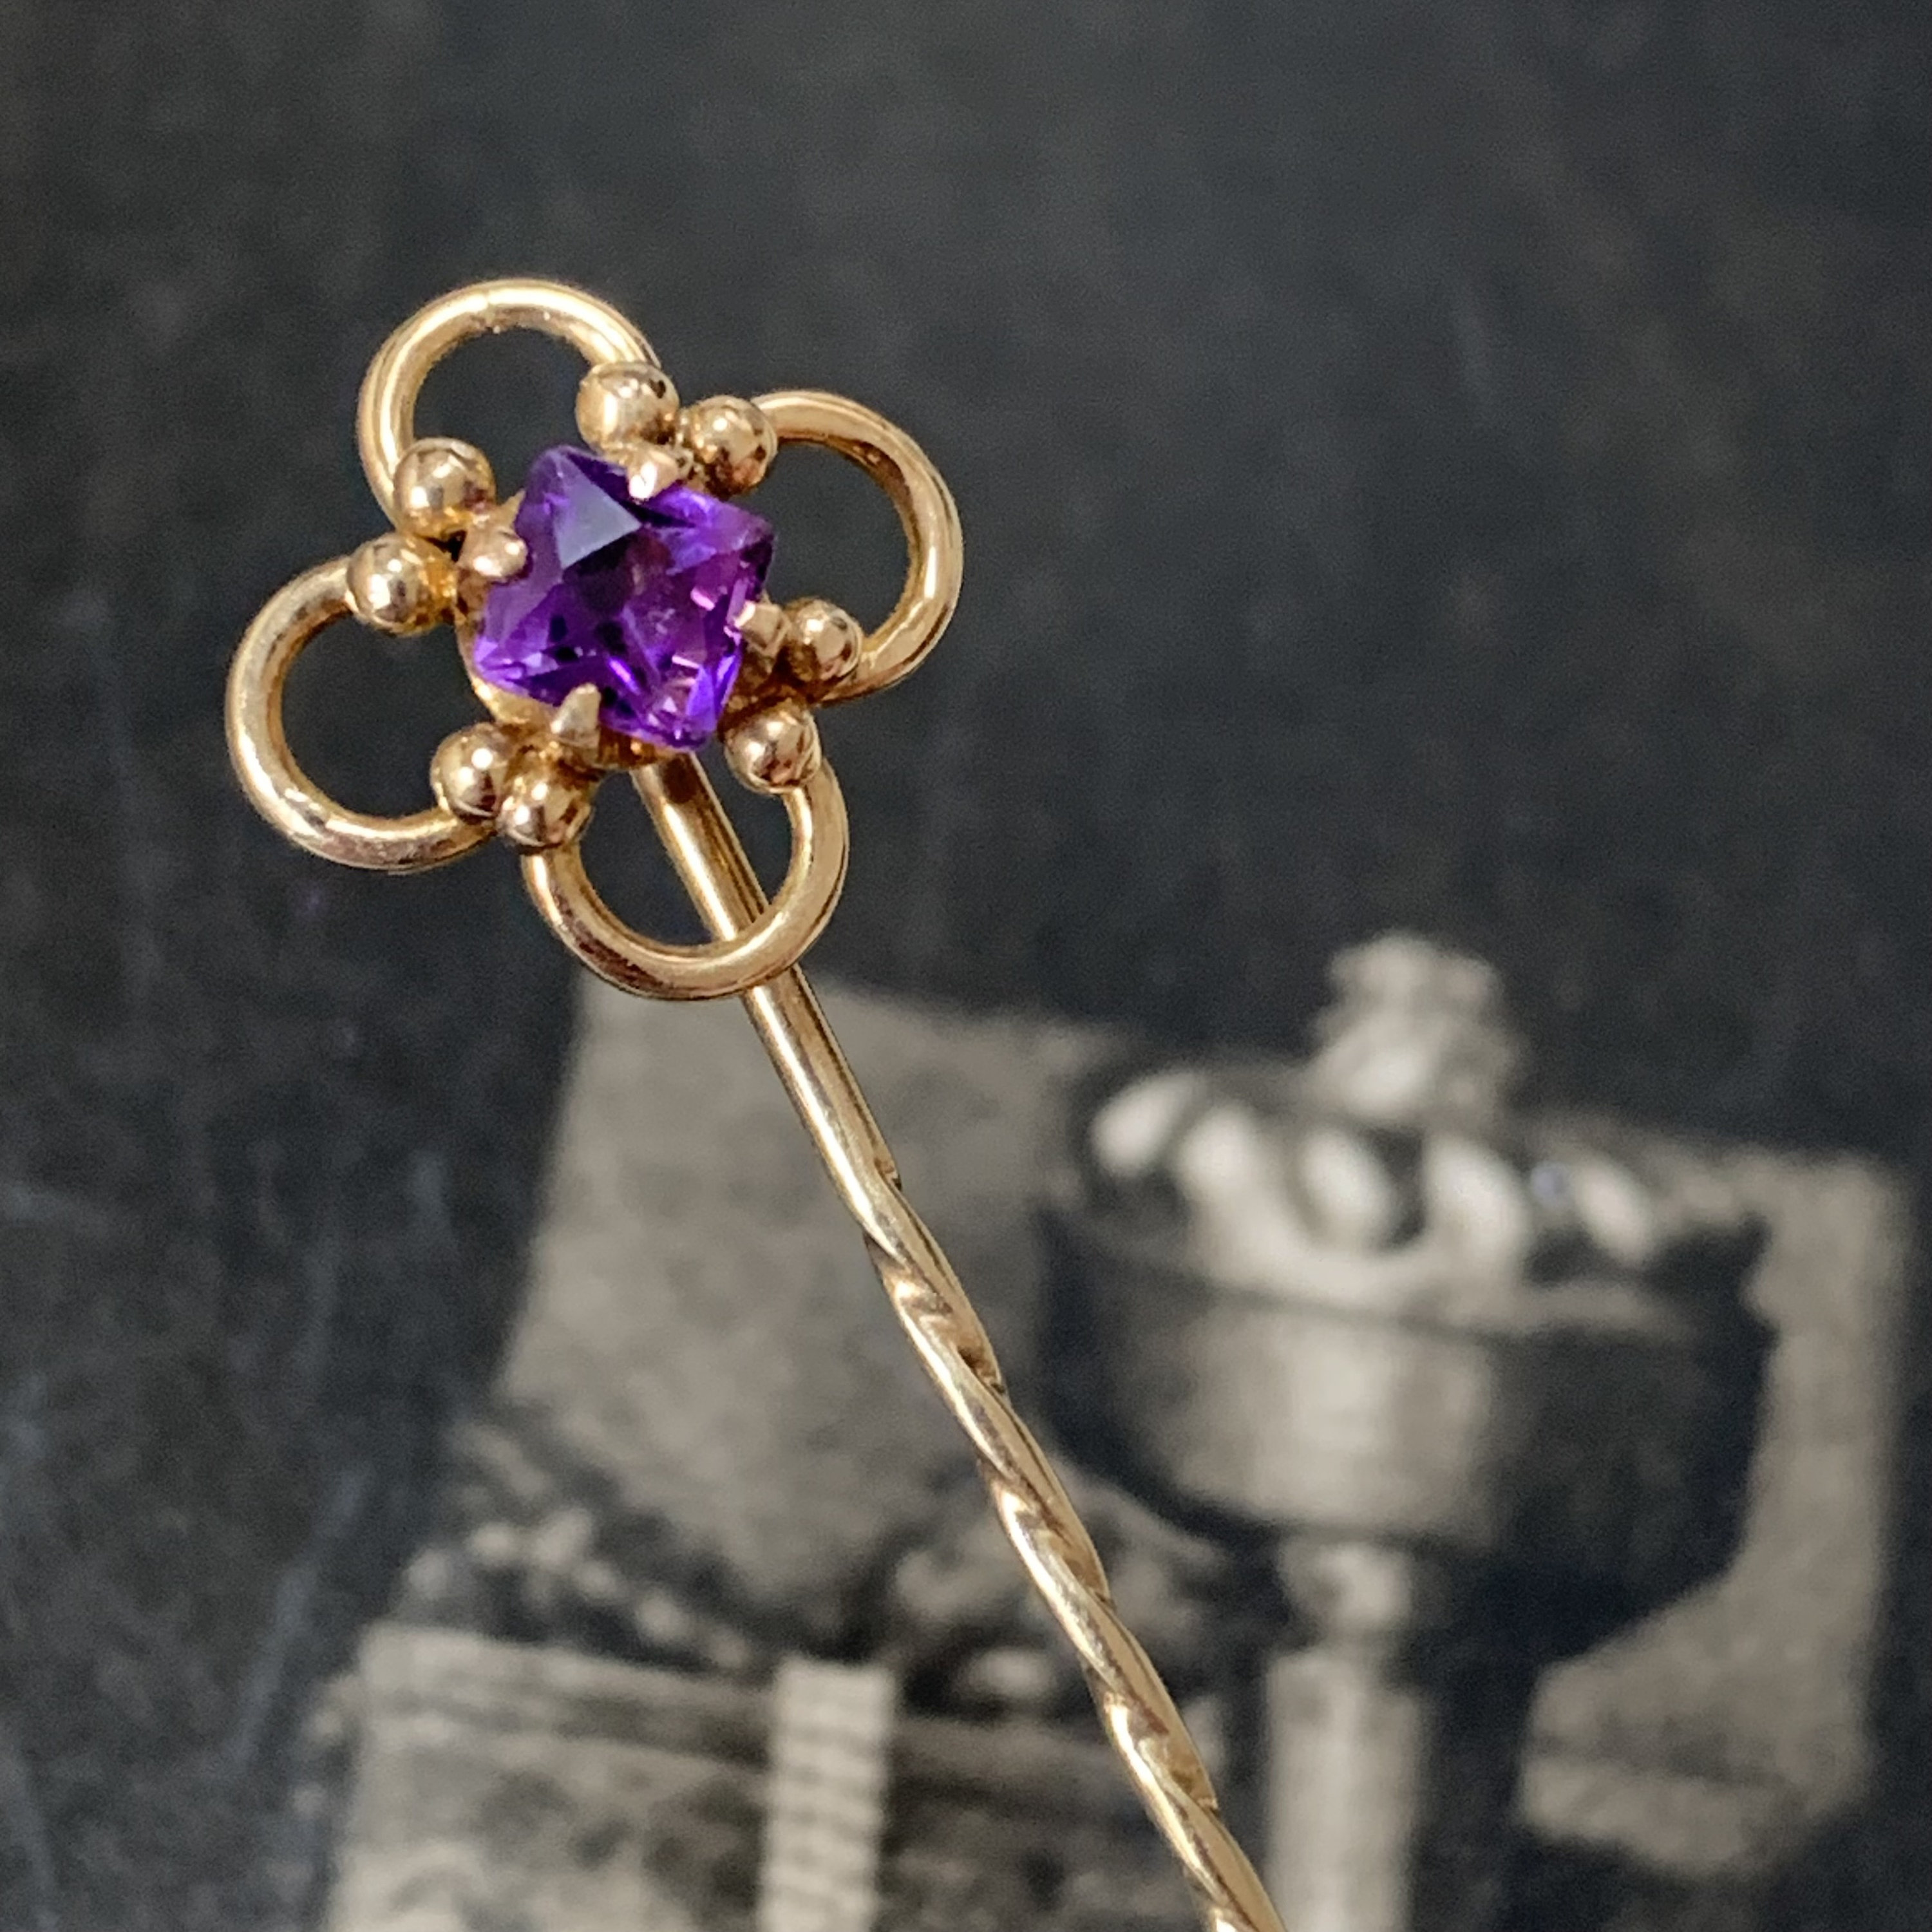 Antique Dress Stick Pin Or Tie in 14Ct Yellow Gold With Square Cut Amethyst To A Quarterfoil Style Surrround